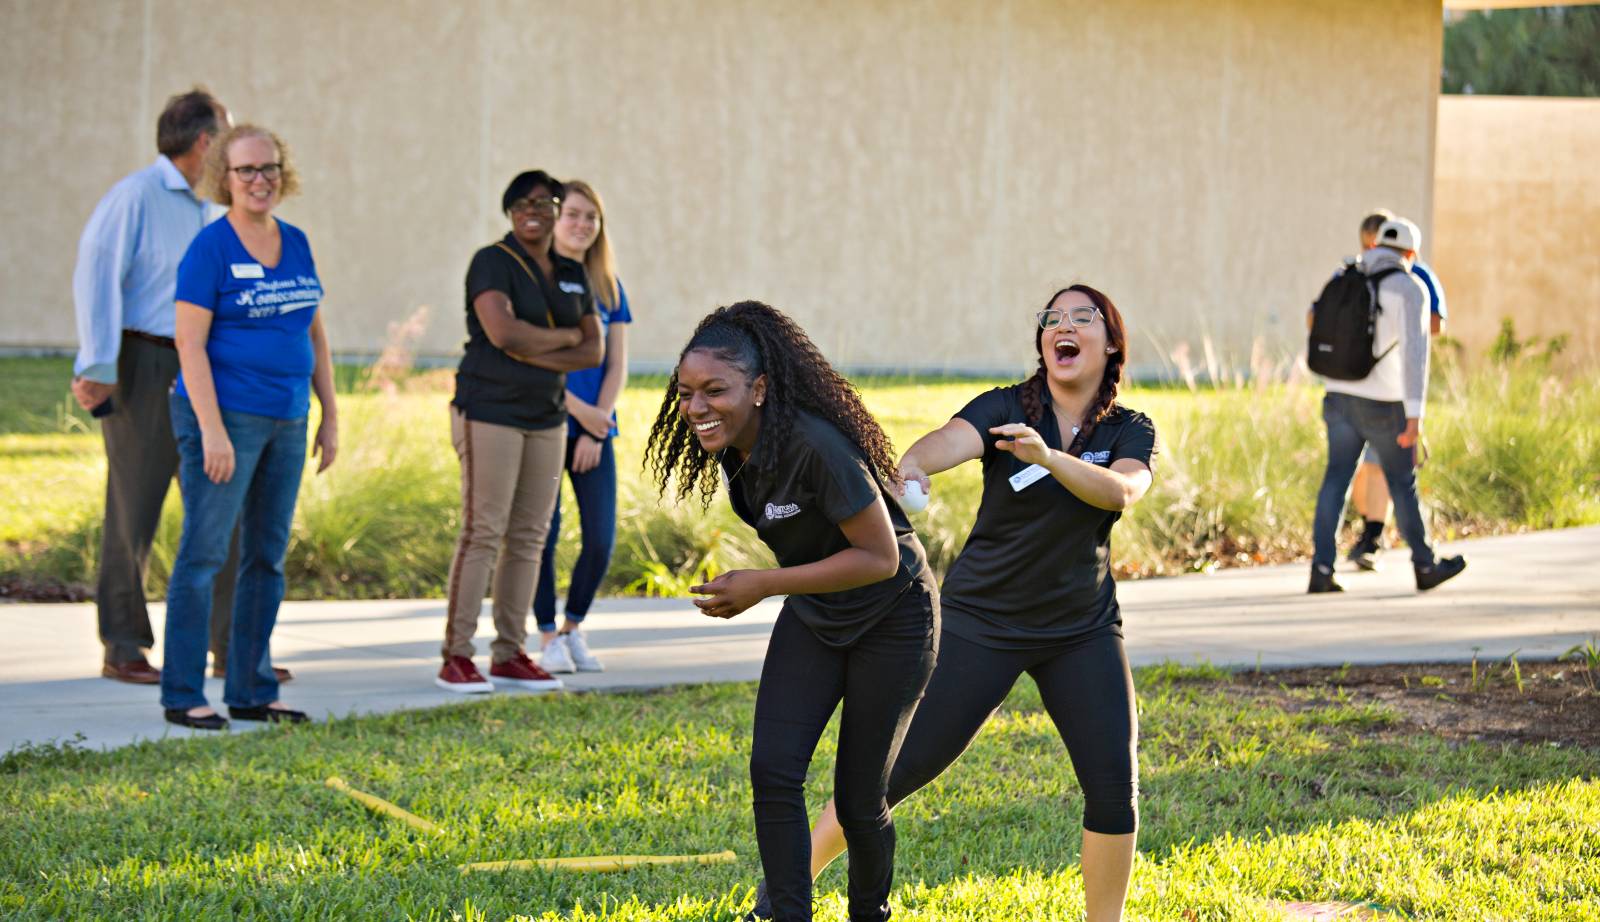 students playing outside at an event